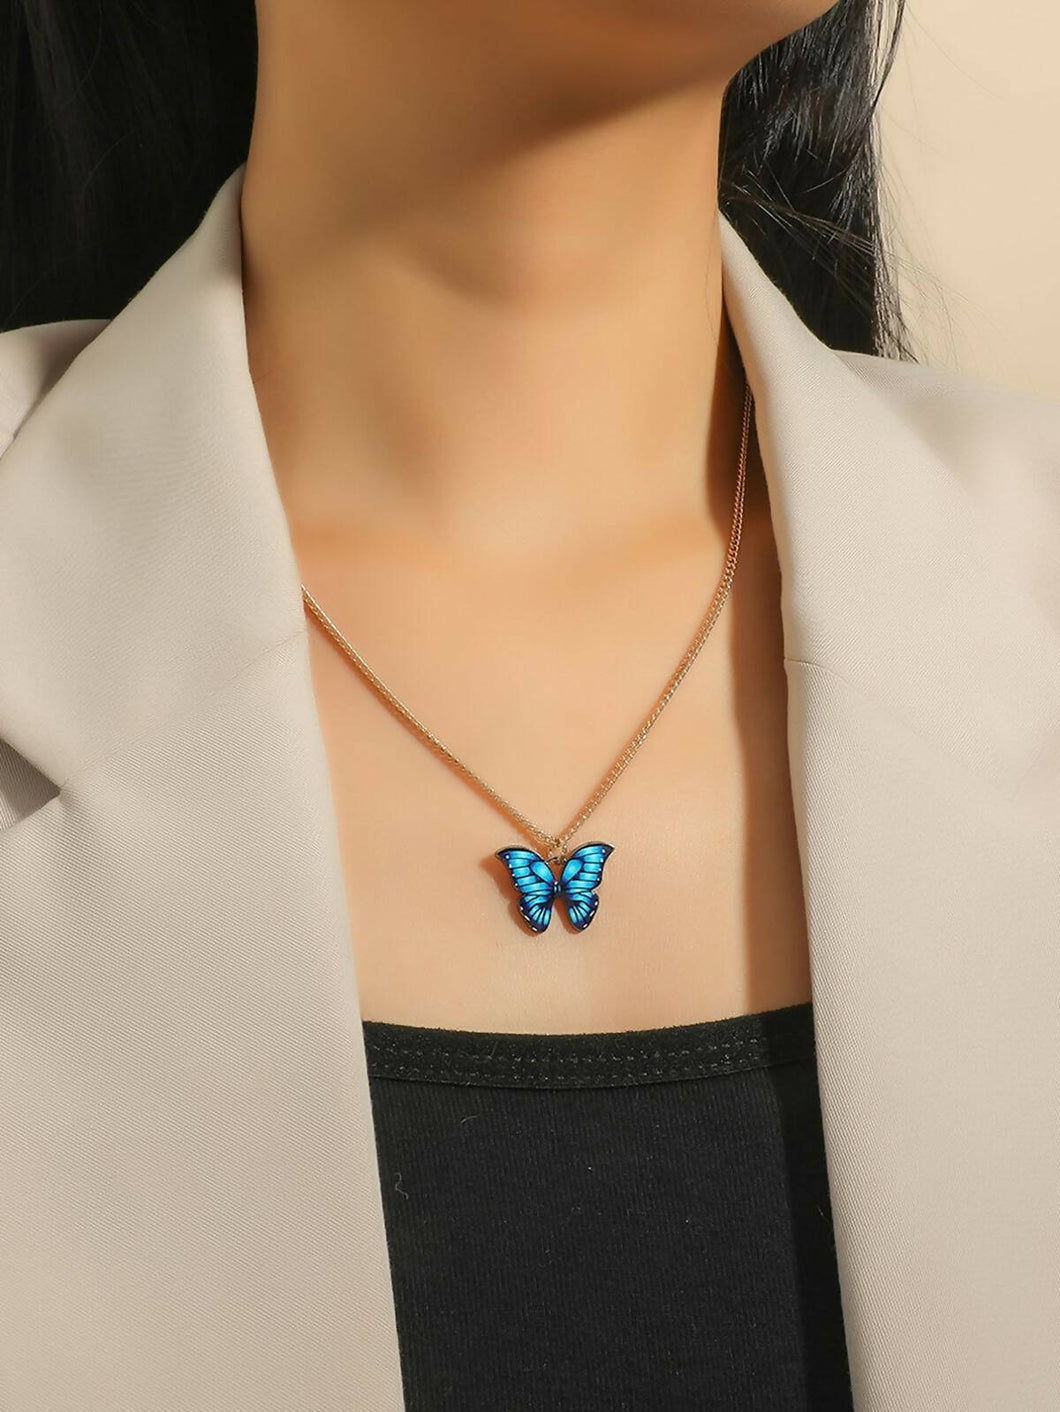 Trendy Butterfly Pendant Necklaces in 4 different colors